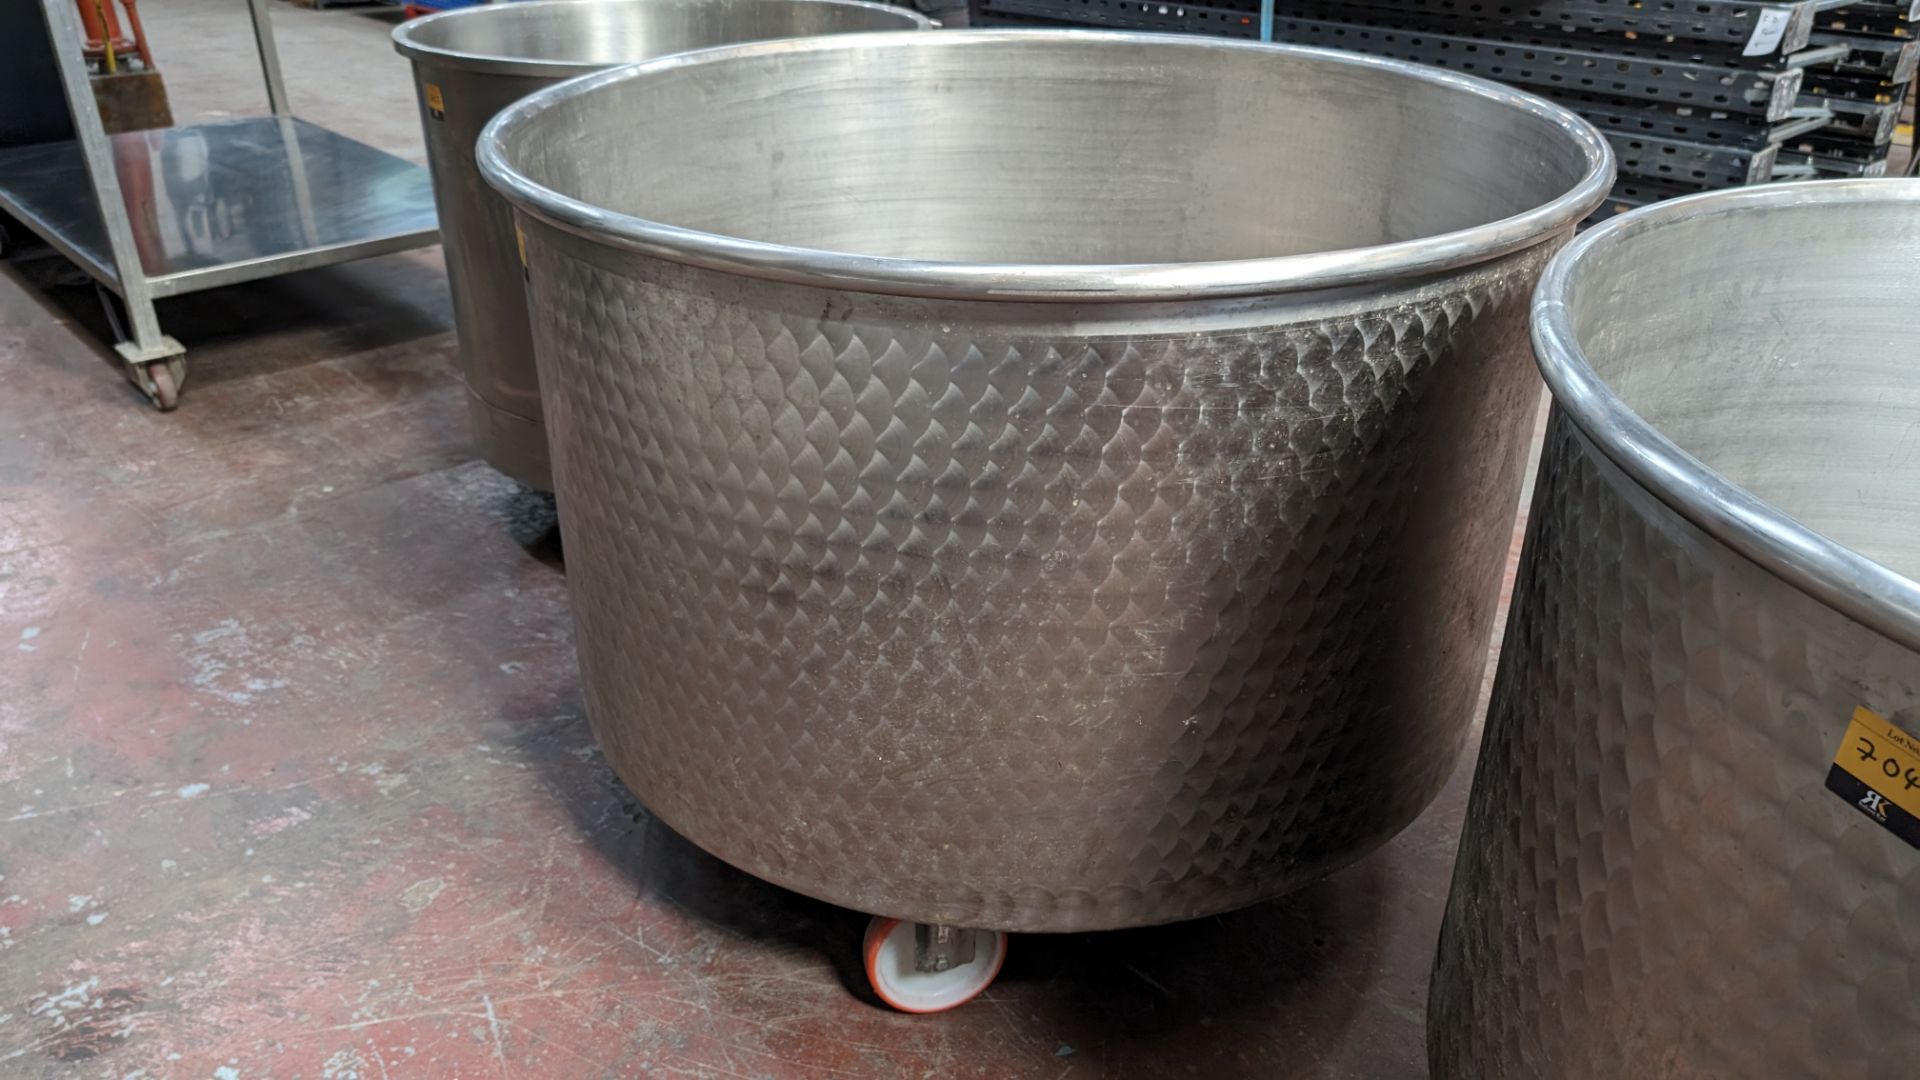 Wheeled tank in stainless steel - 600L capacity. Understood to have been bought in 2020 - Image 4 of 5